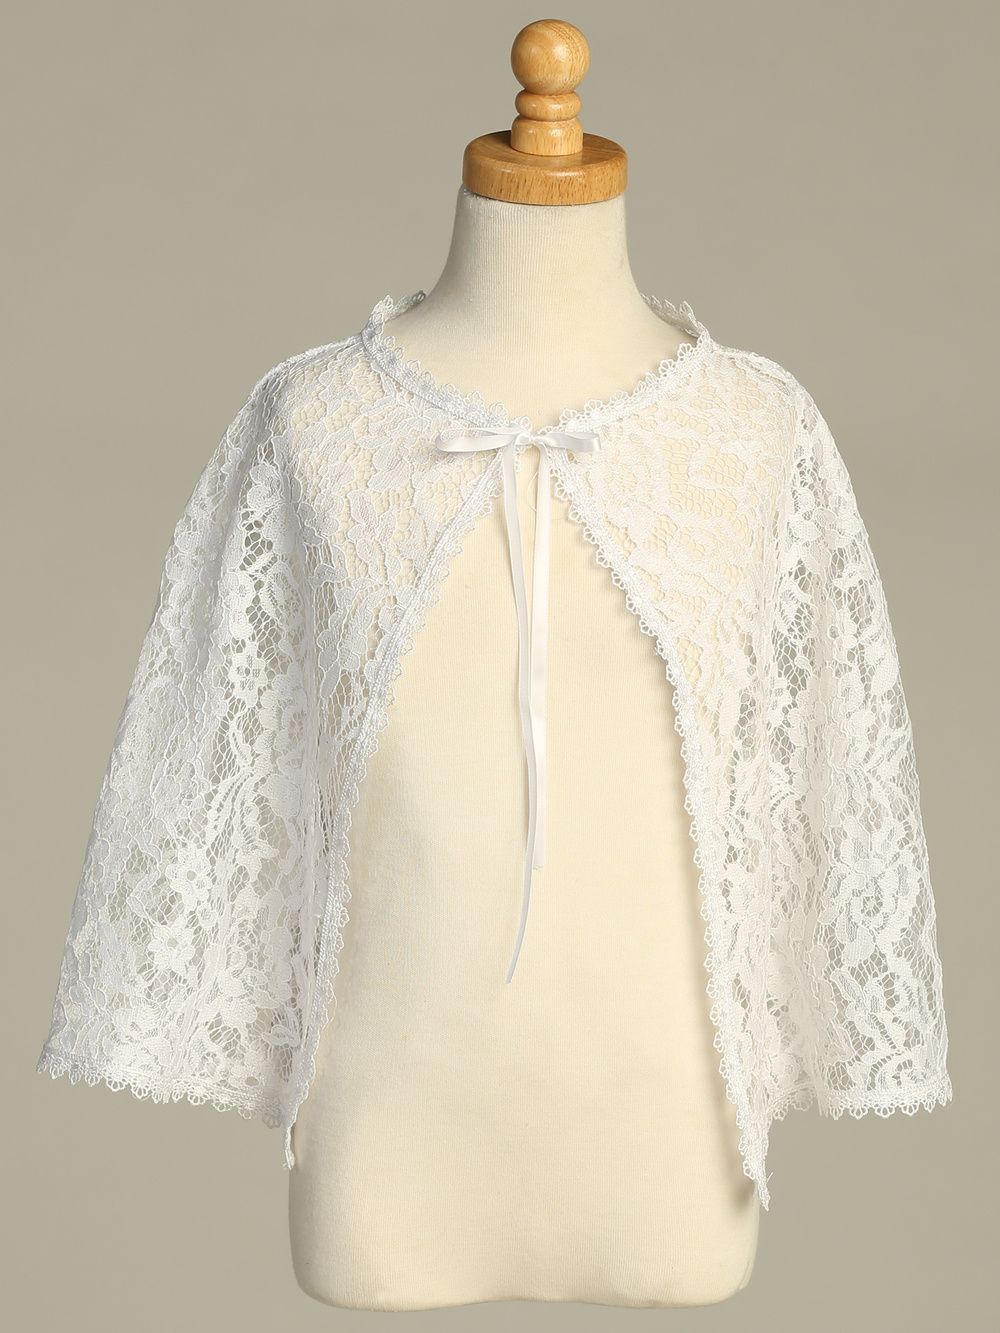 Lace Cape with Ribbon Tie - Style 1112